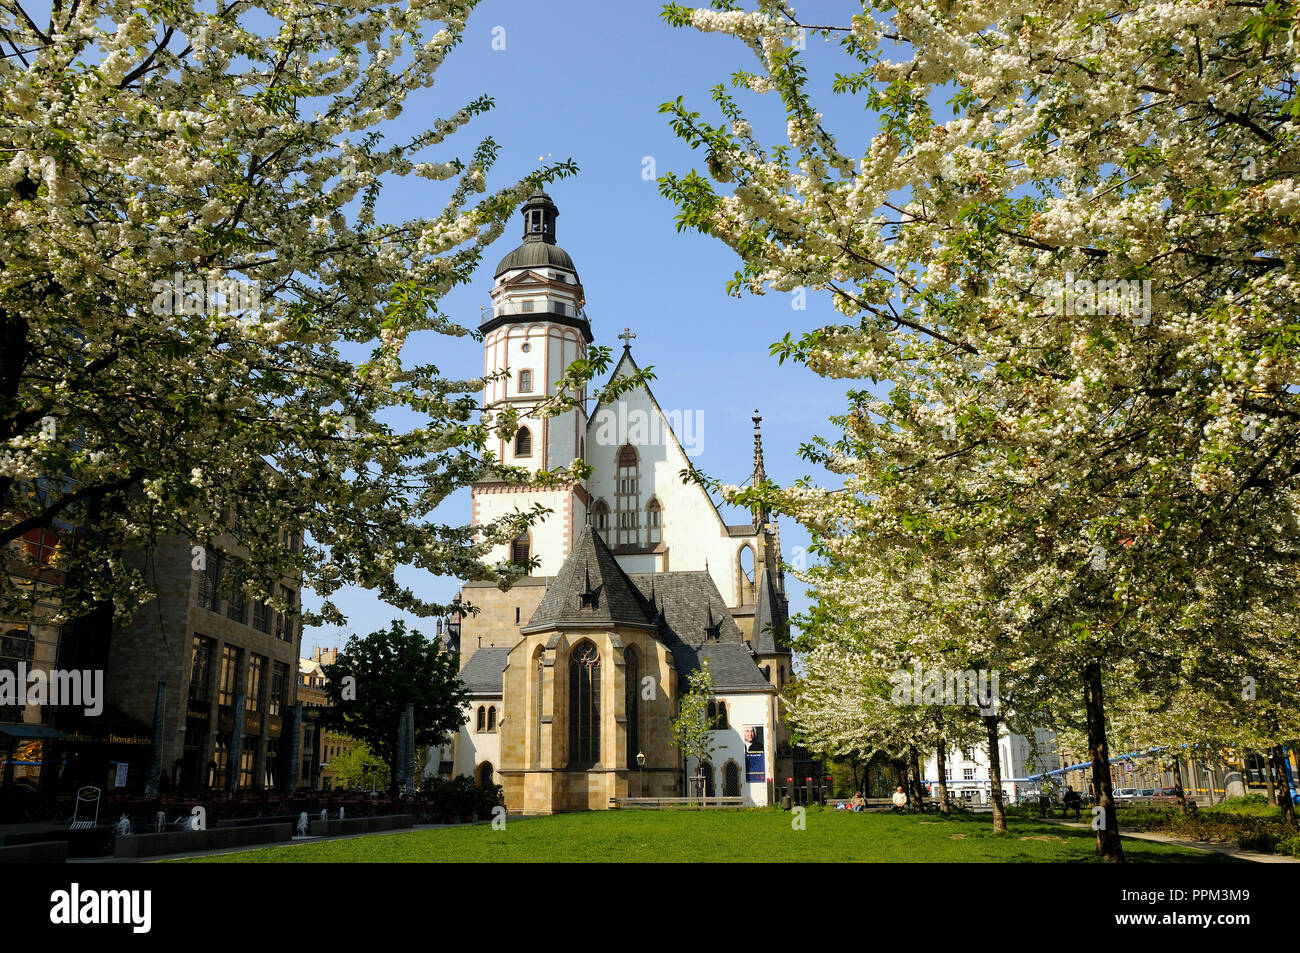 Thomaskirche where, in 1723, Johann Sebastian Bach was appointed Cantor and Director of Music. Leipzig, Germany Stock Photo